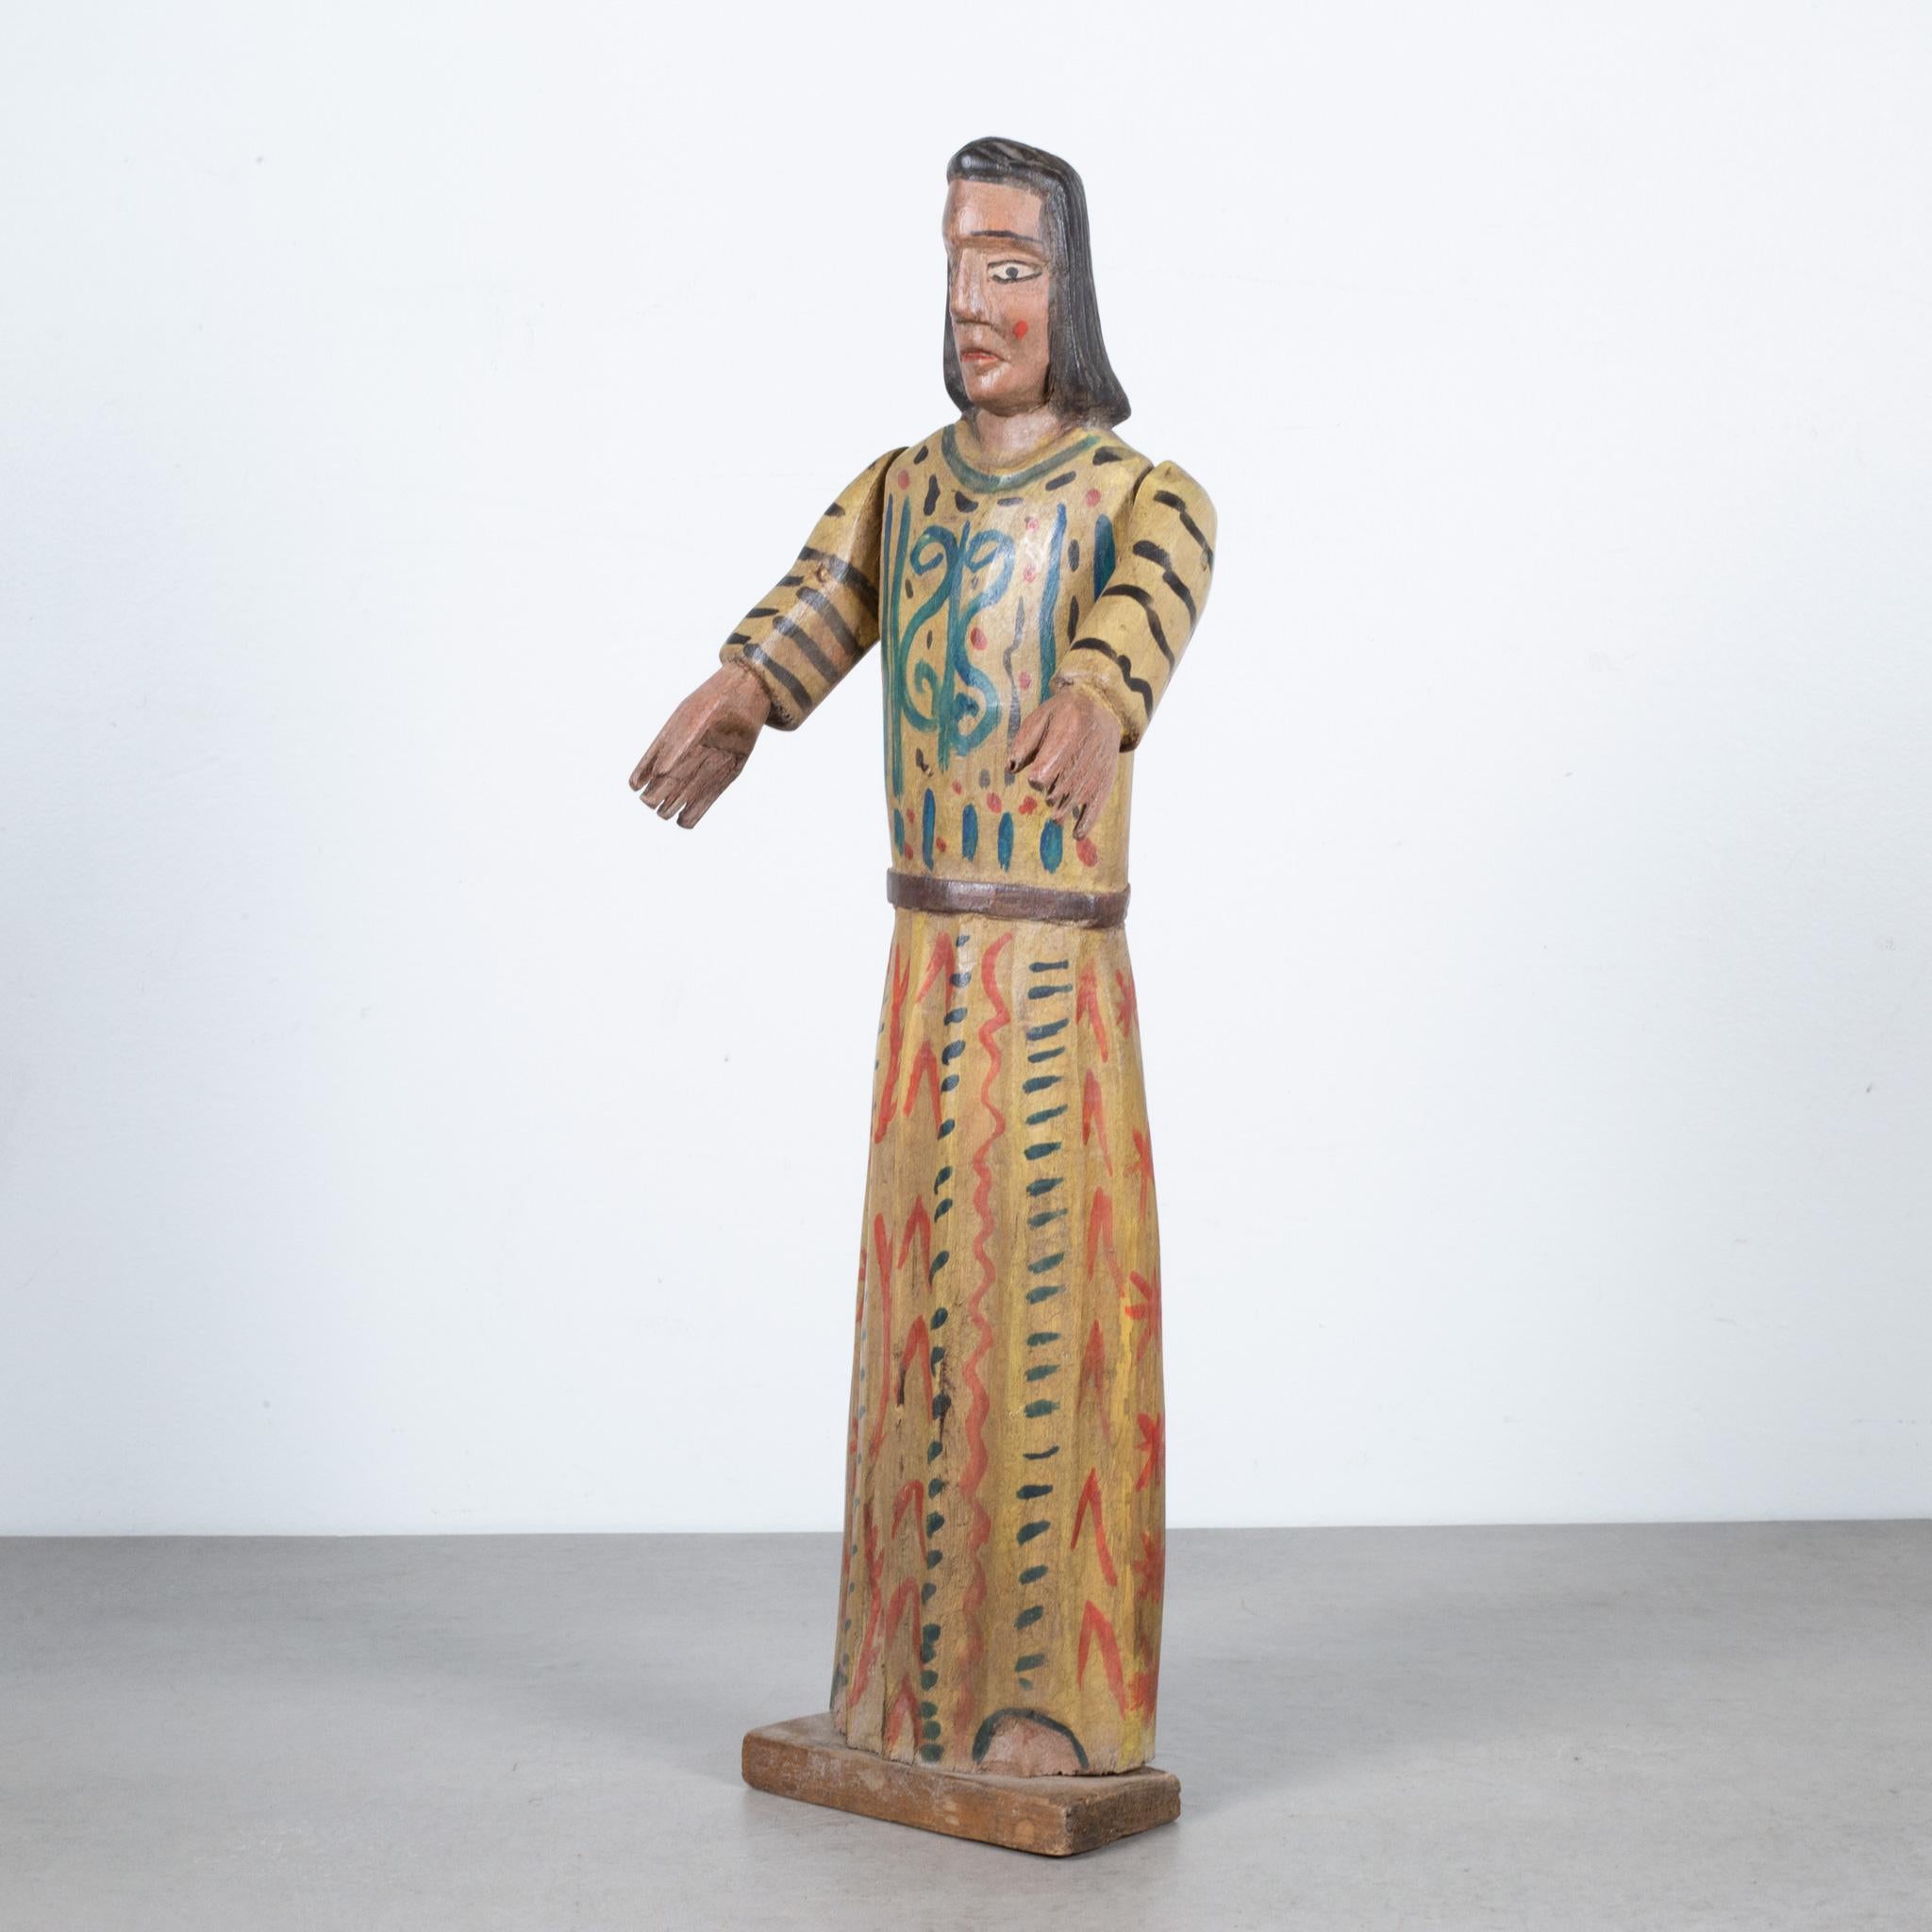 About

A hand painted carved wooden Mexican or Central American Santo (saint) with articulating arms.

 Creator unknown.
Date of manufacture circa 1950-1960.
Materials and techniques carved, painted wood.
Condition good. Wear consistent with